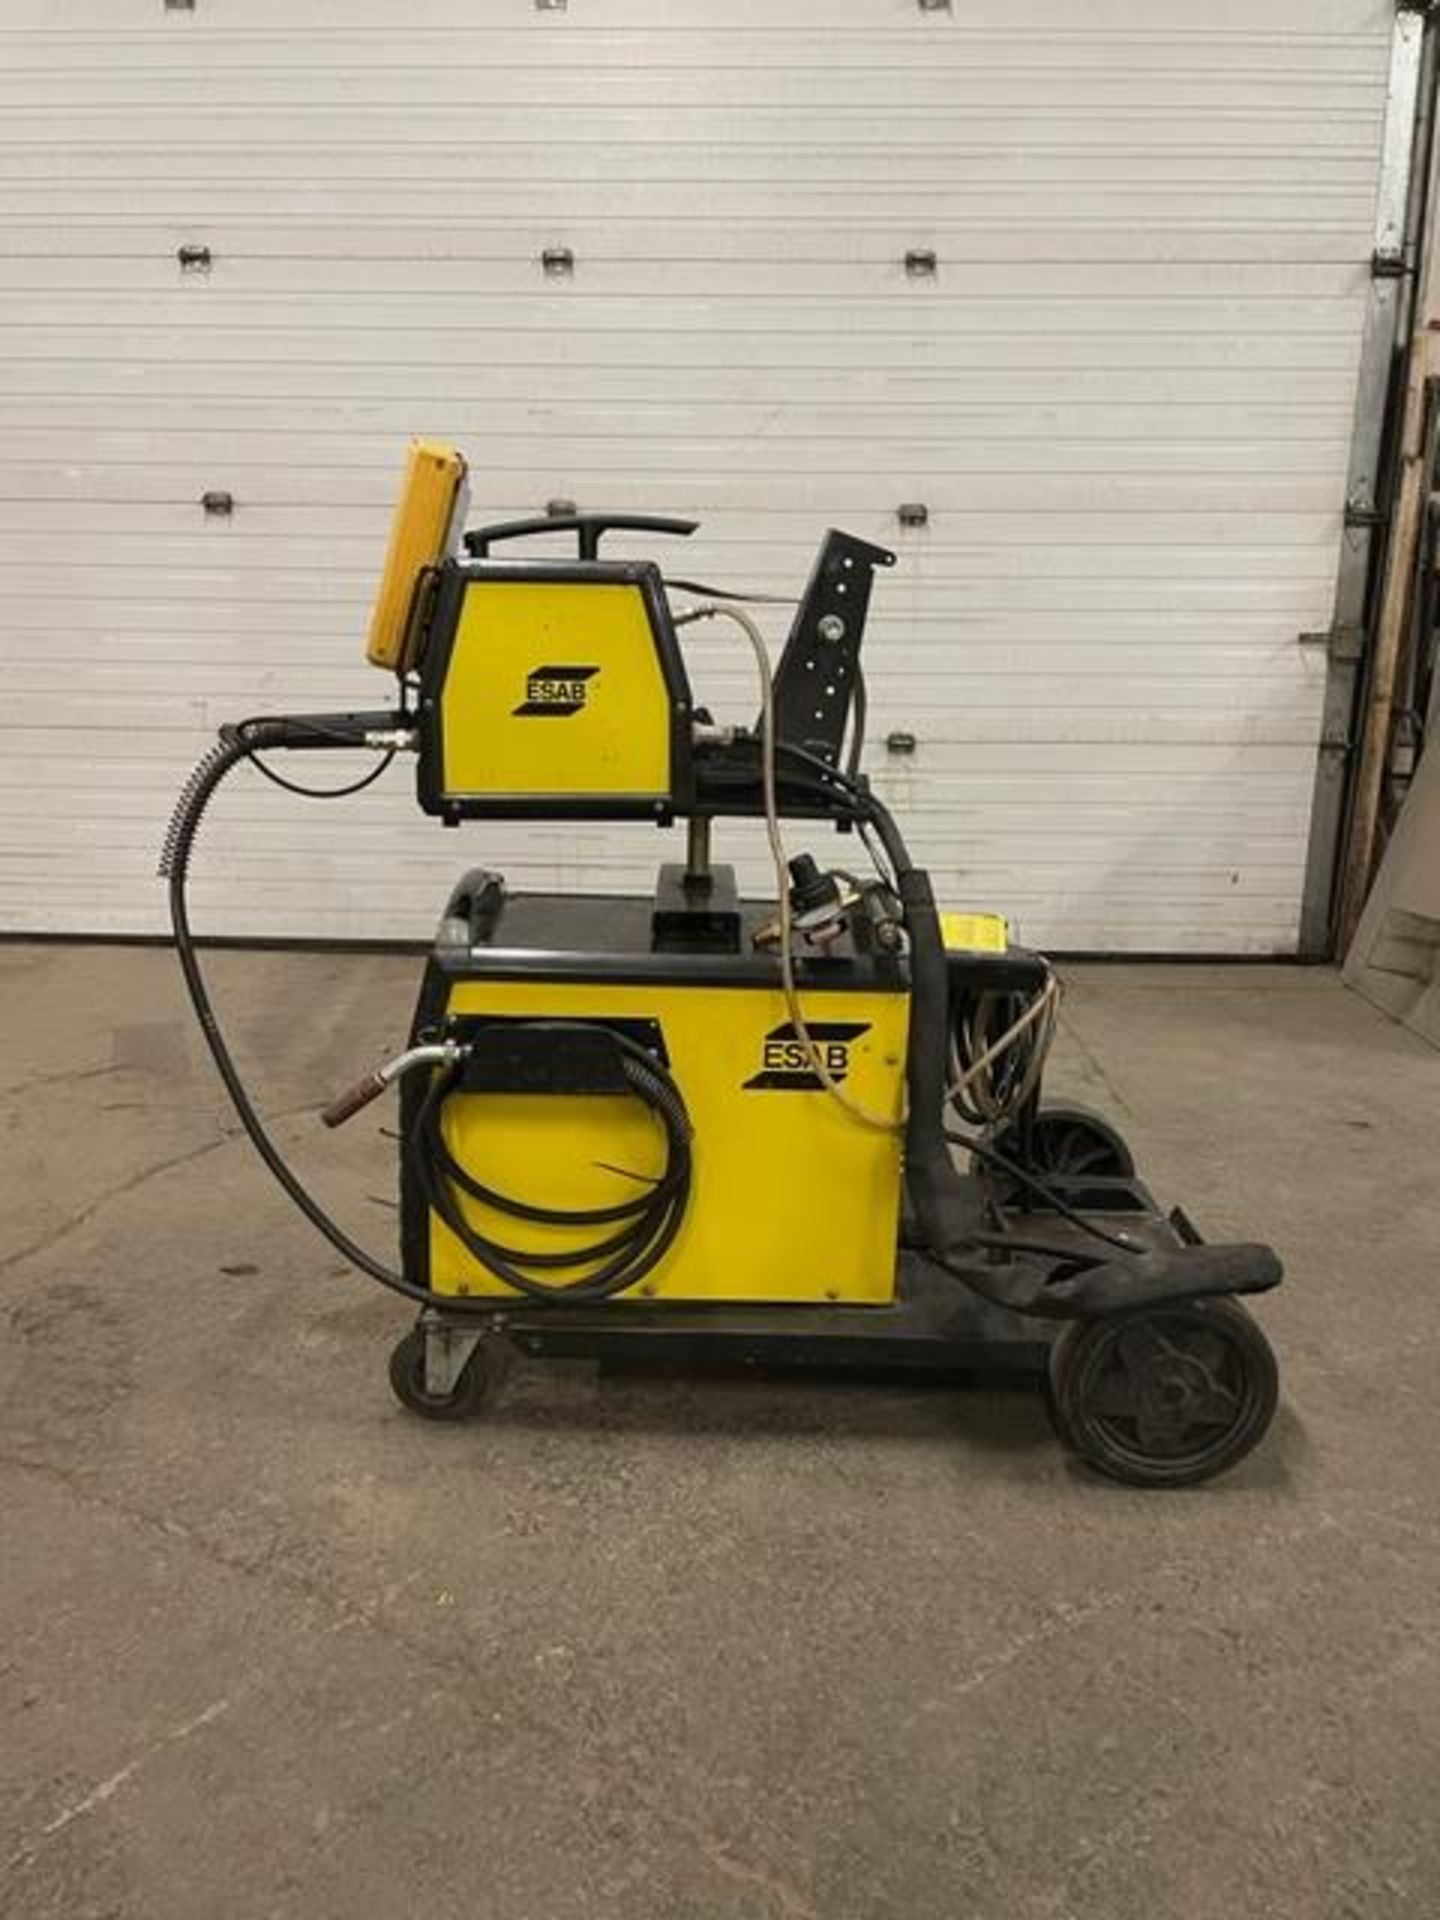 Esab AristoMig 500 Mig Welder Complete with Wire Feeder and Mig gun - 500 amp unit with remote